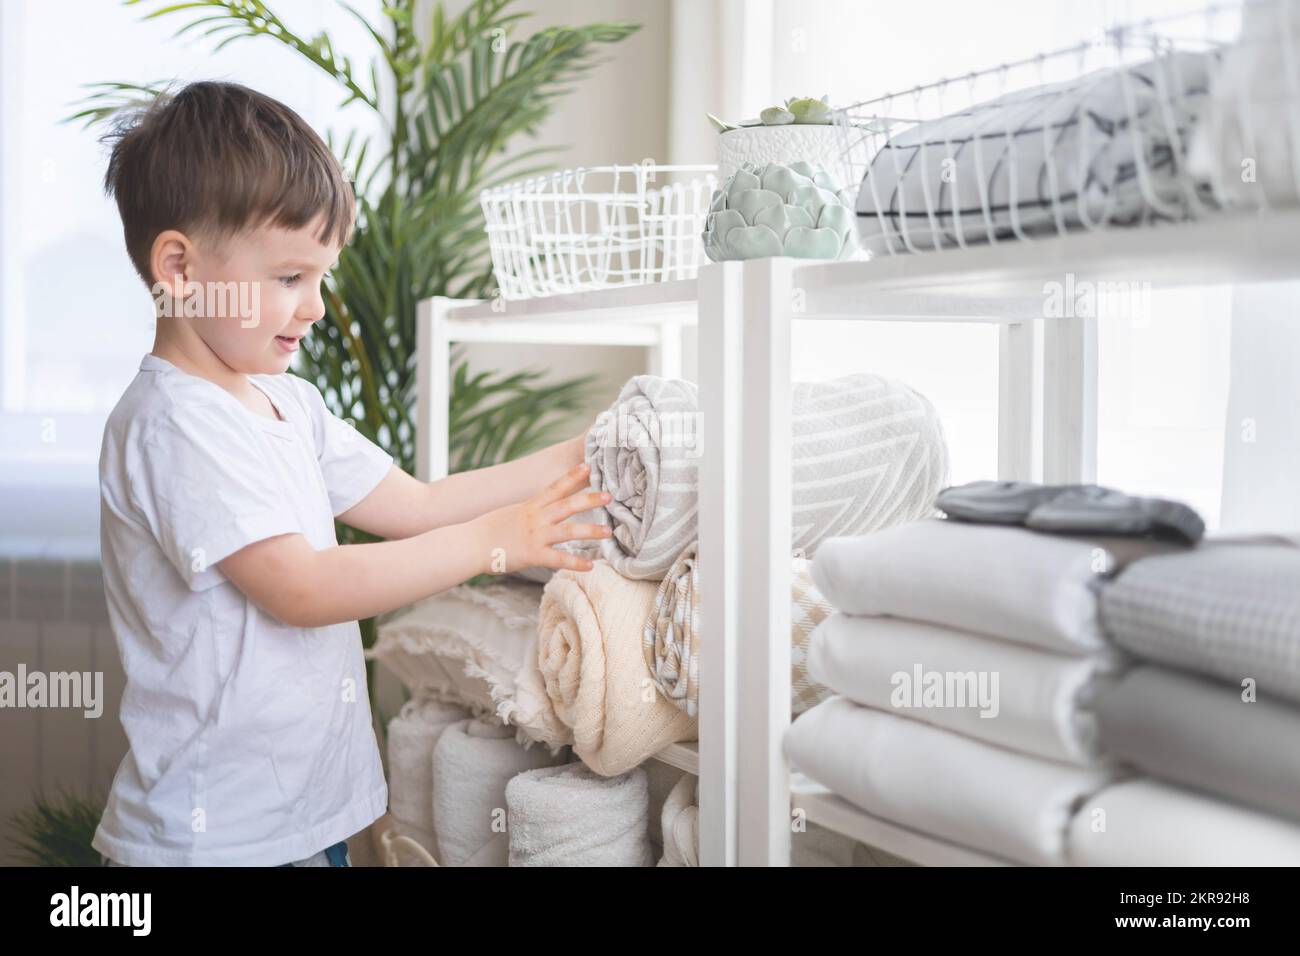 The child puts the bedding in a closet with neatly folded things. vertical storage. Stock Photo